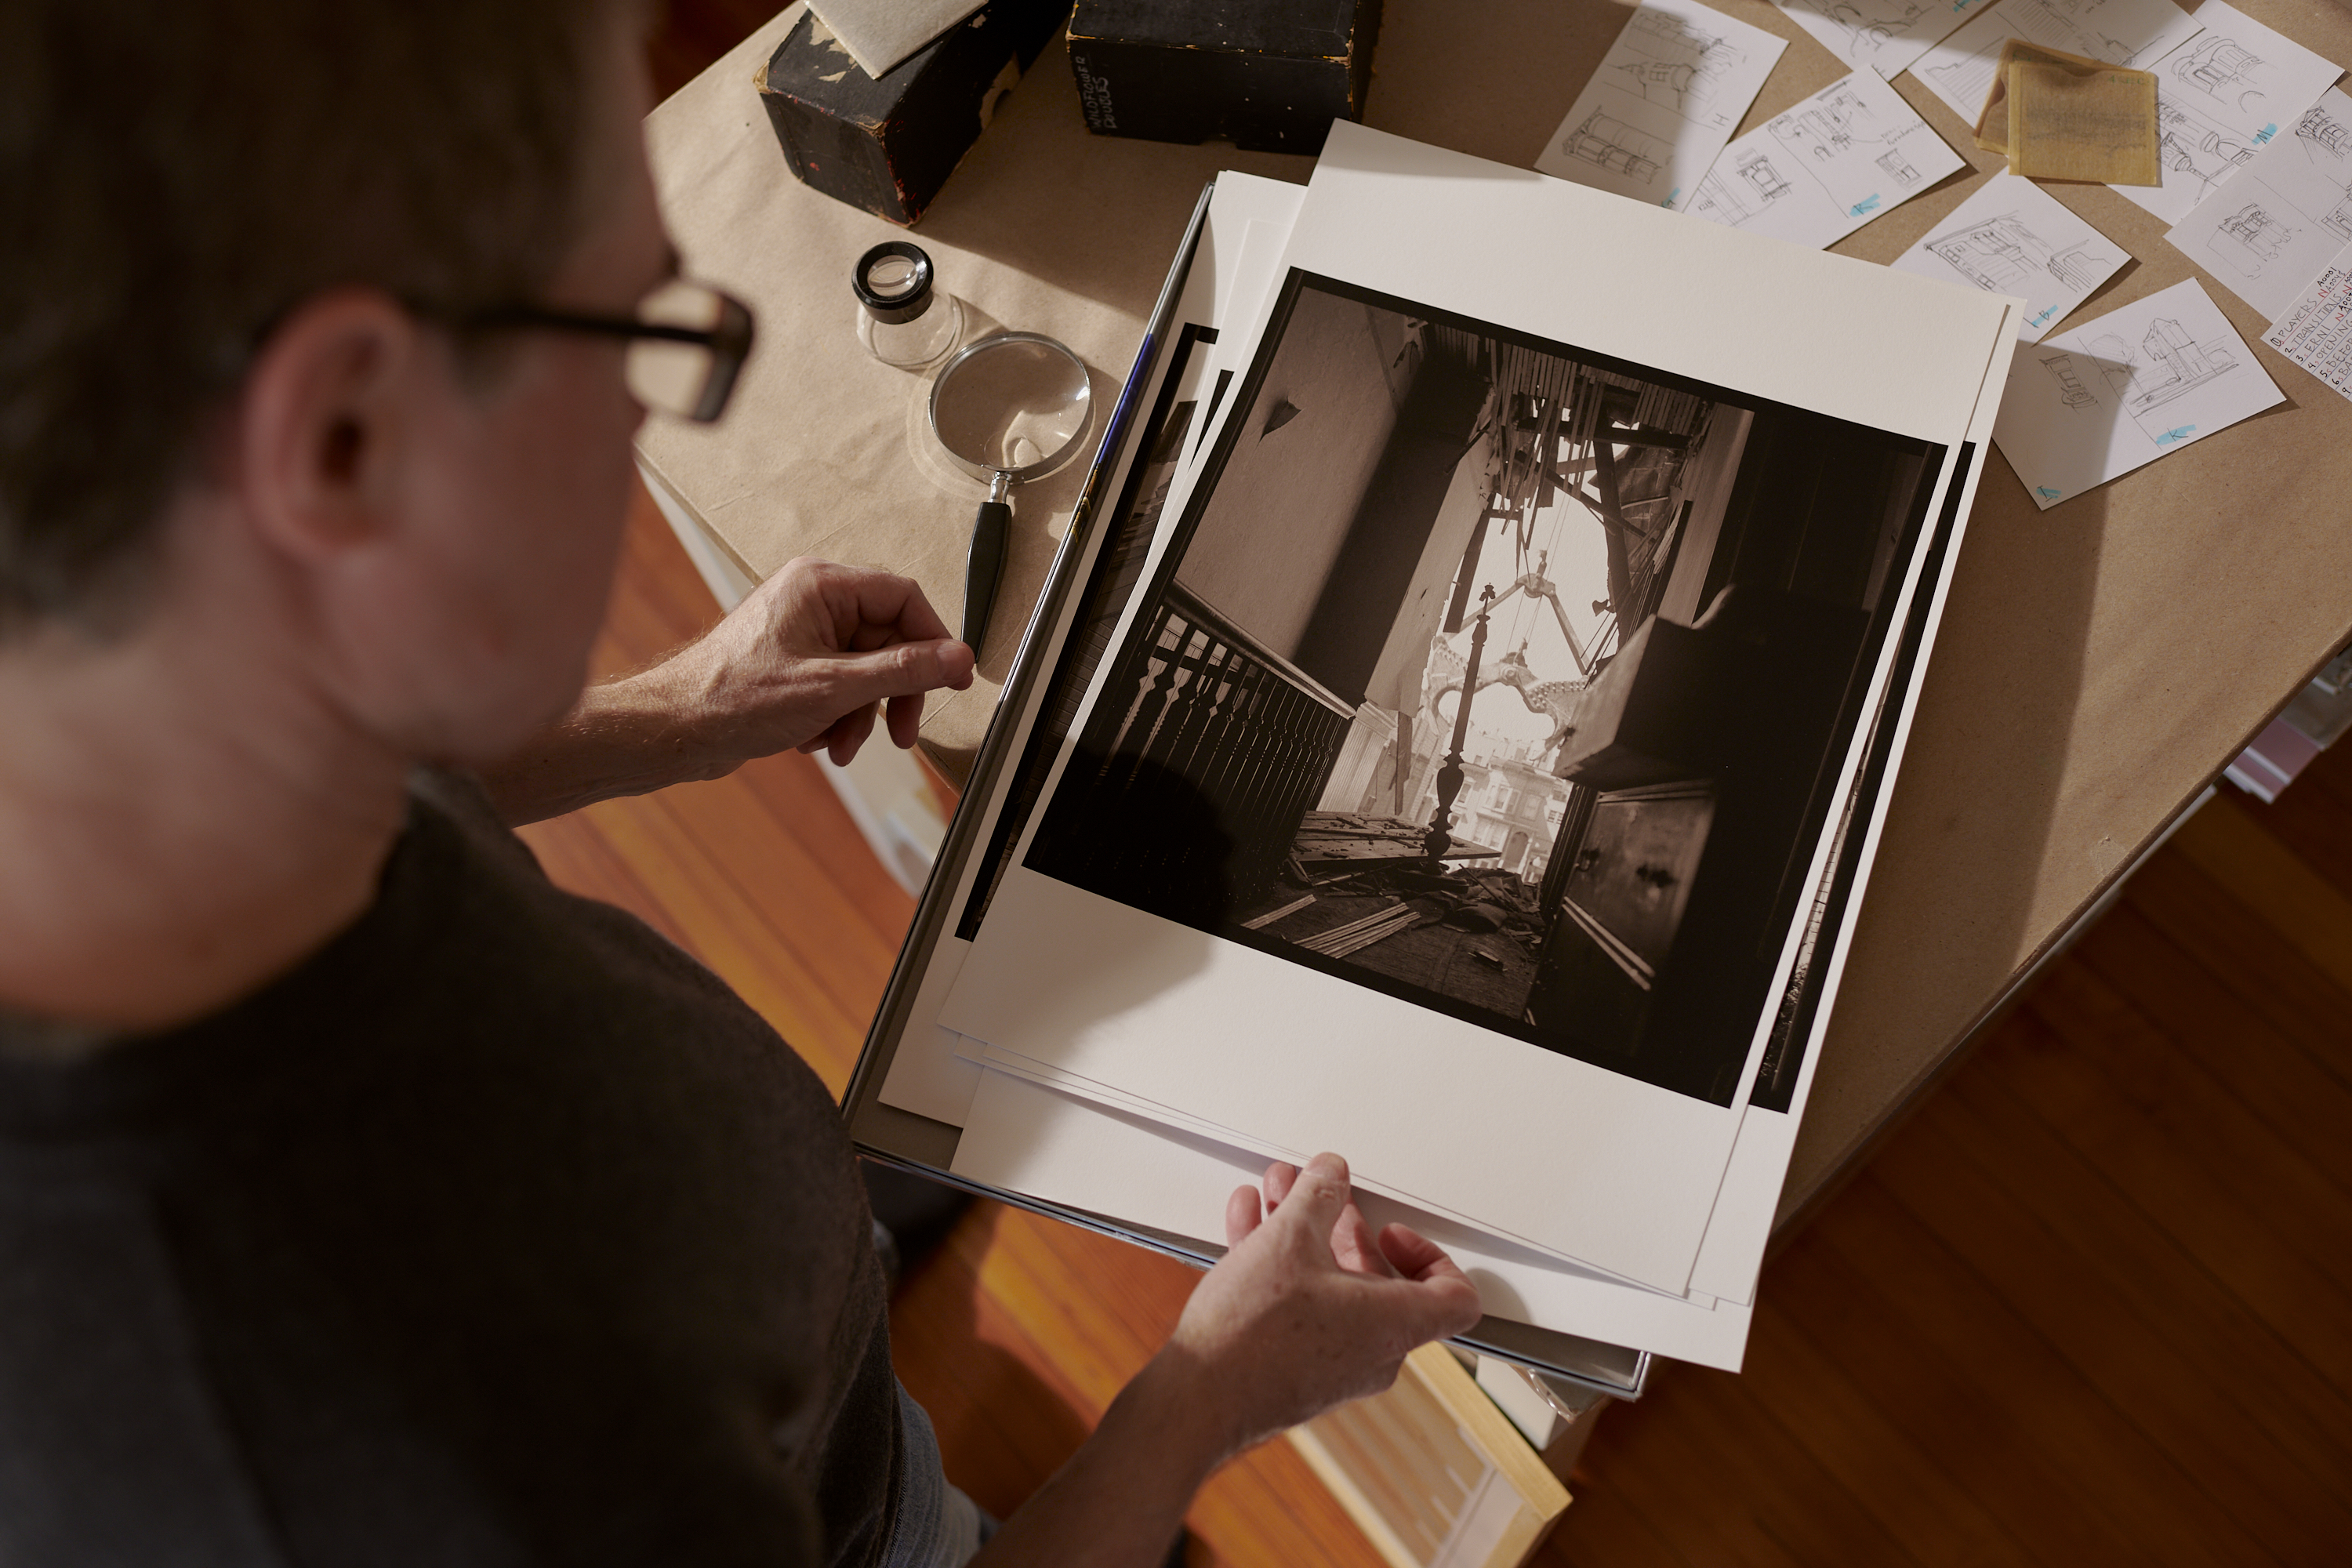 A person examines a black-and-white photograph of a staircase amidst debris; sketches and a magnifying glass lay nearby.